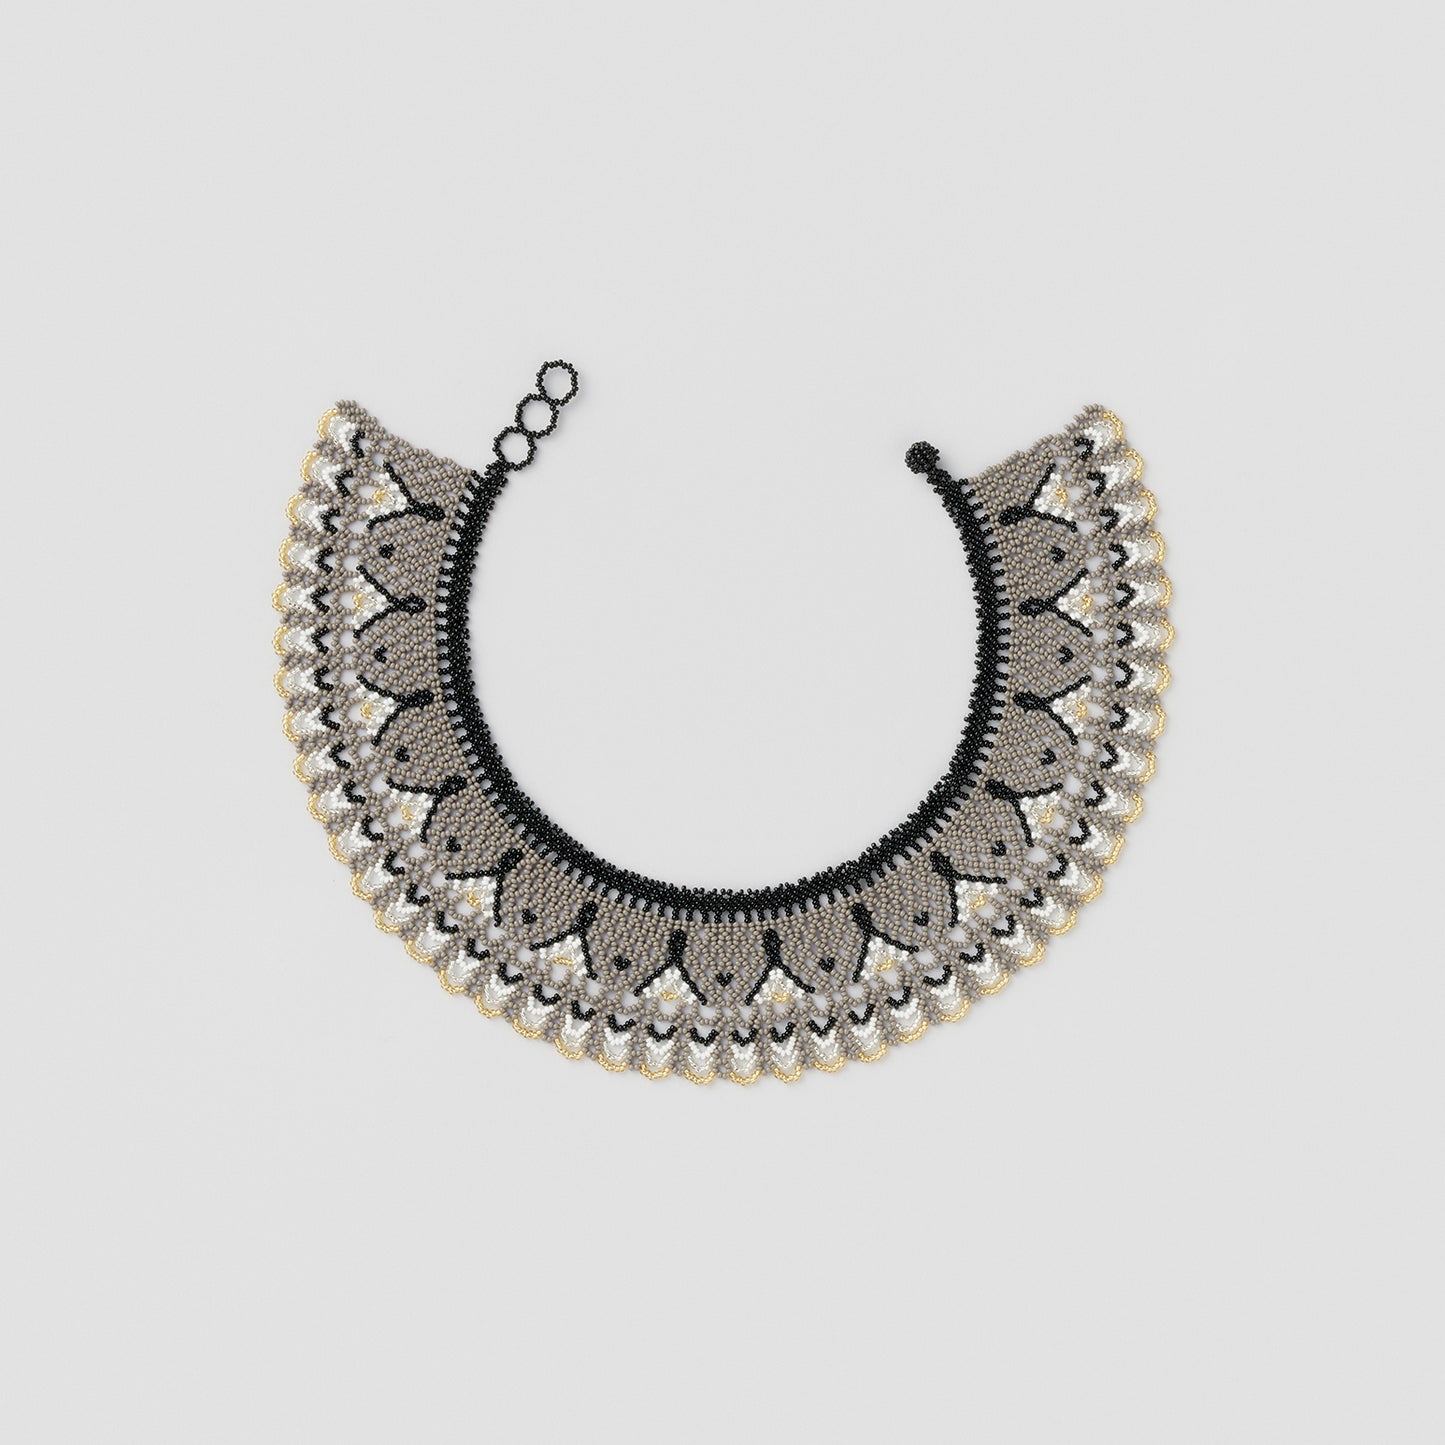 Enlace Beads Collar Necklace / Ladylike